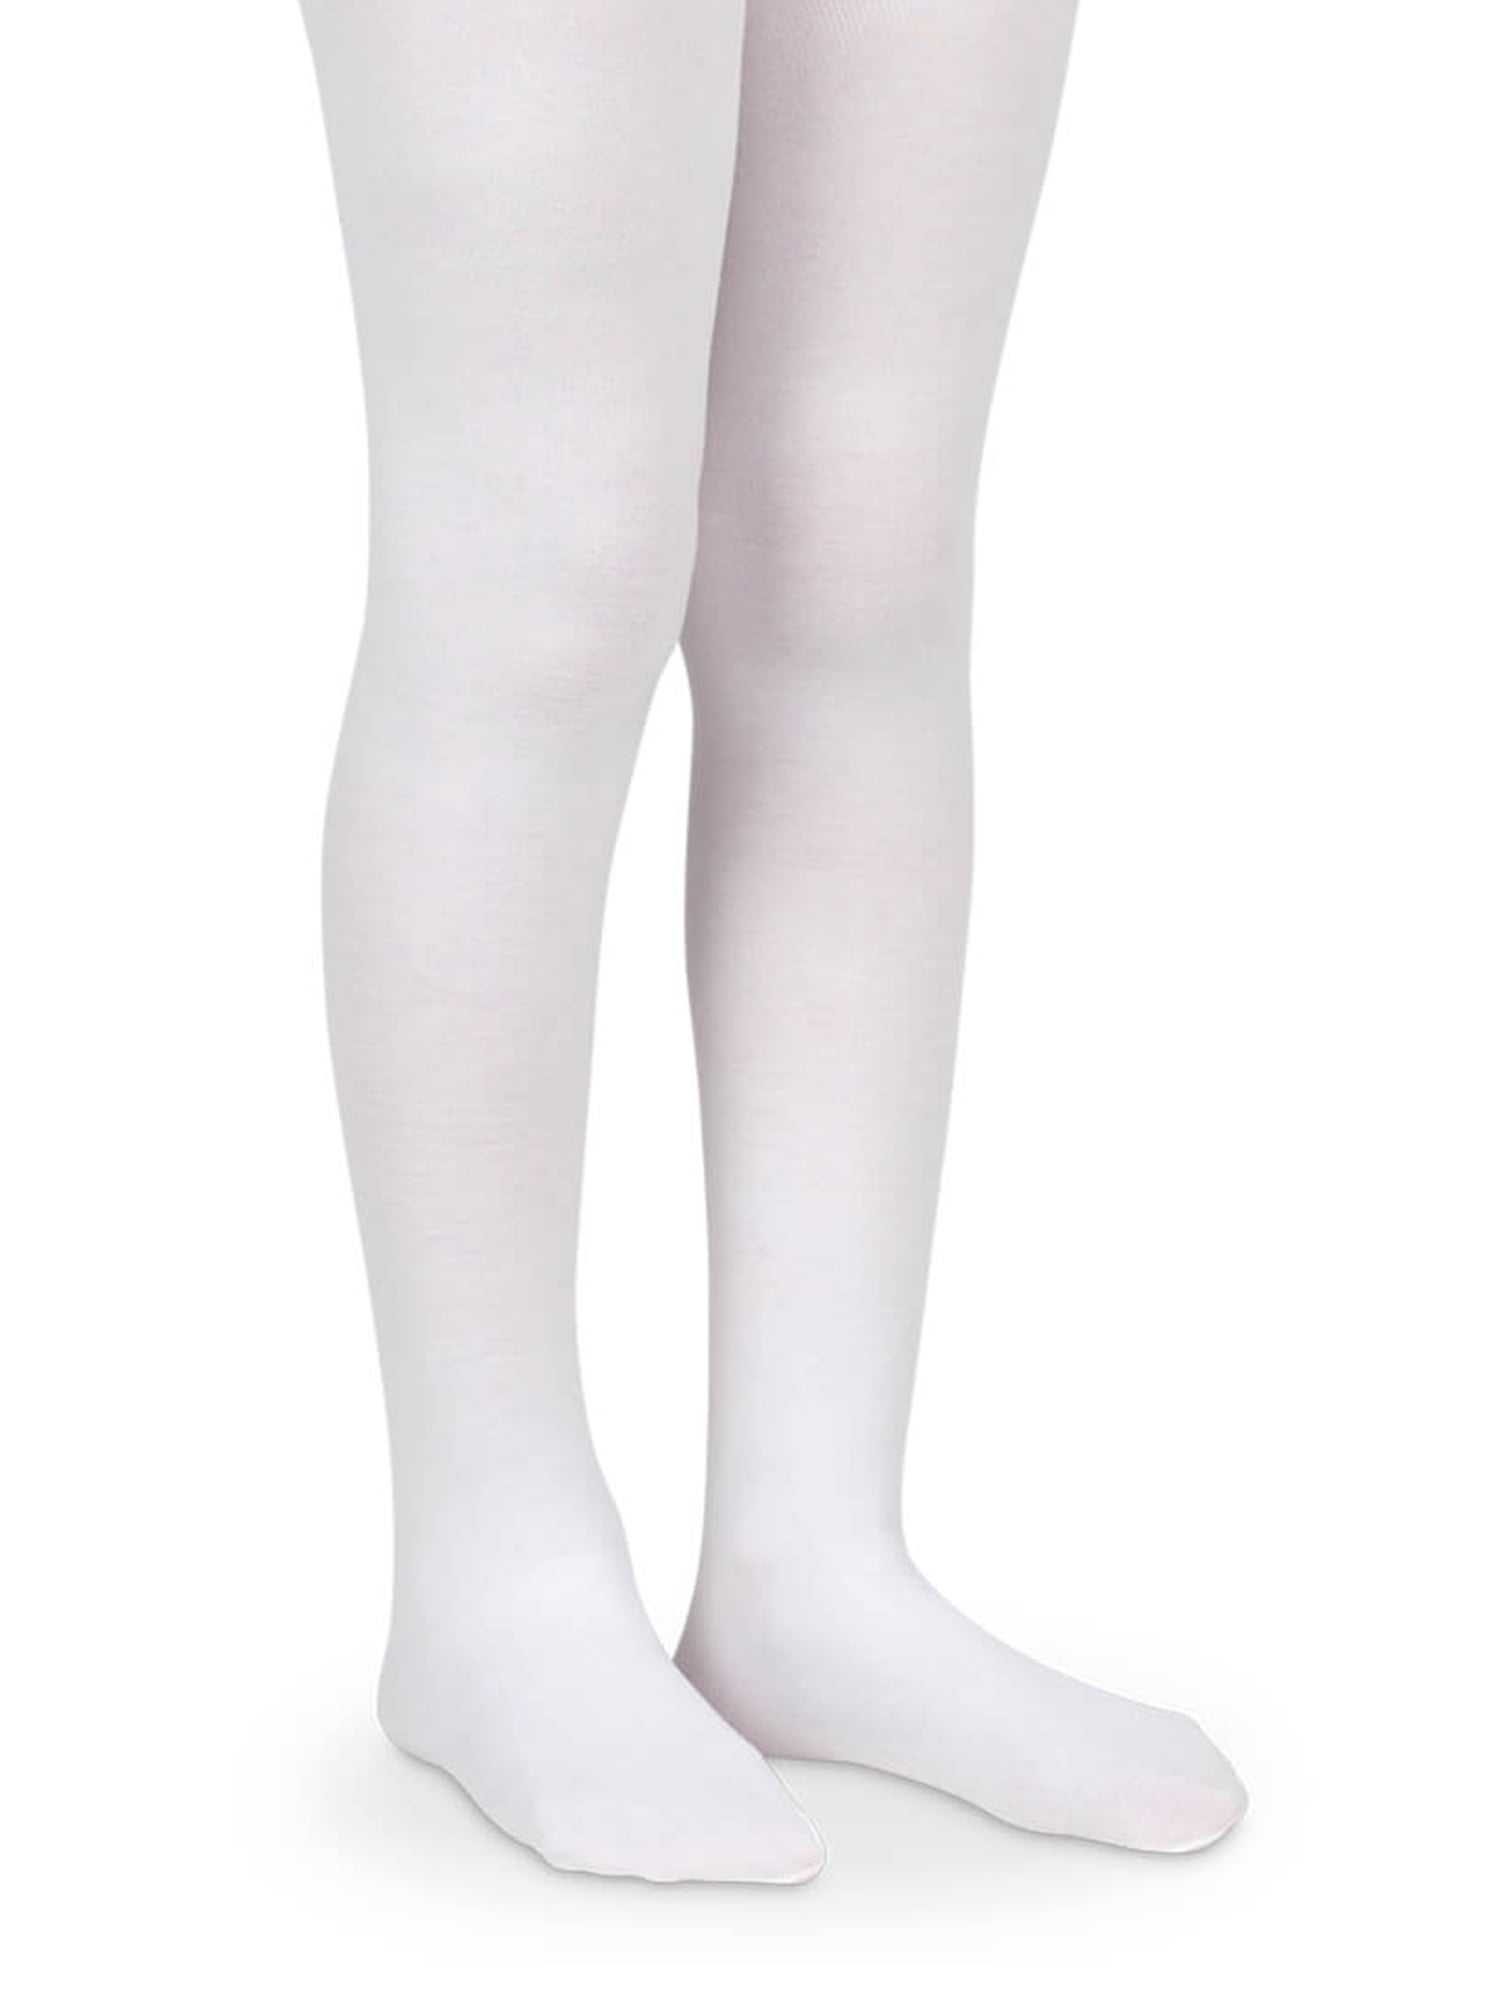 Country Kids Baby Girls Pima Cotton Tights 1 Pair 